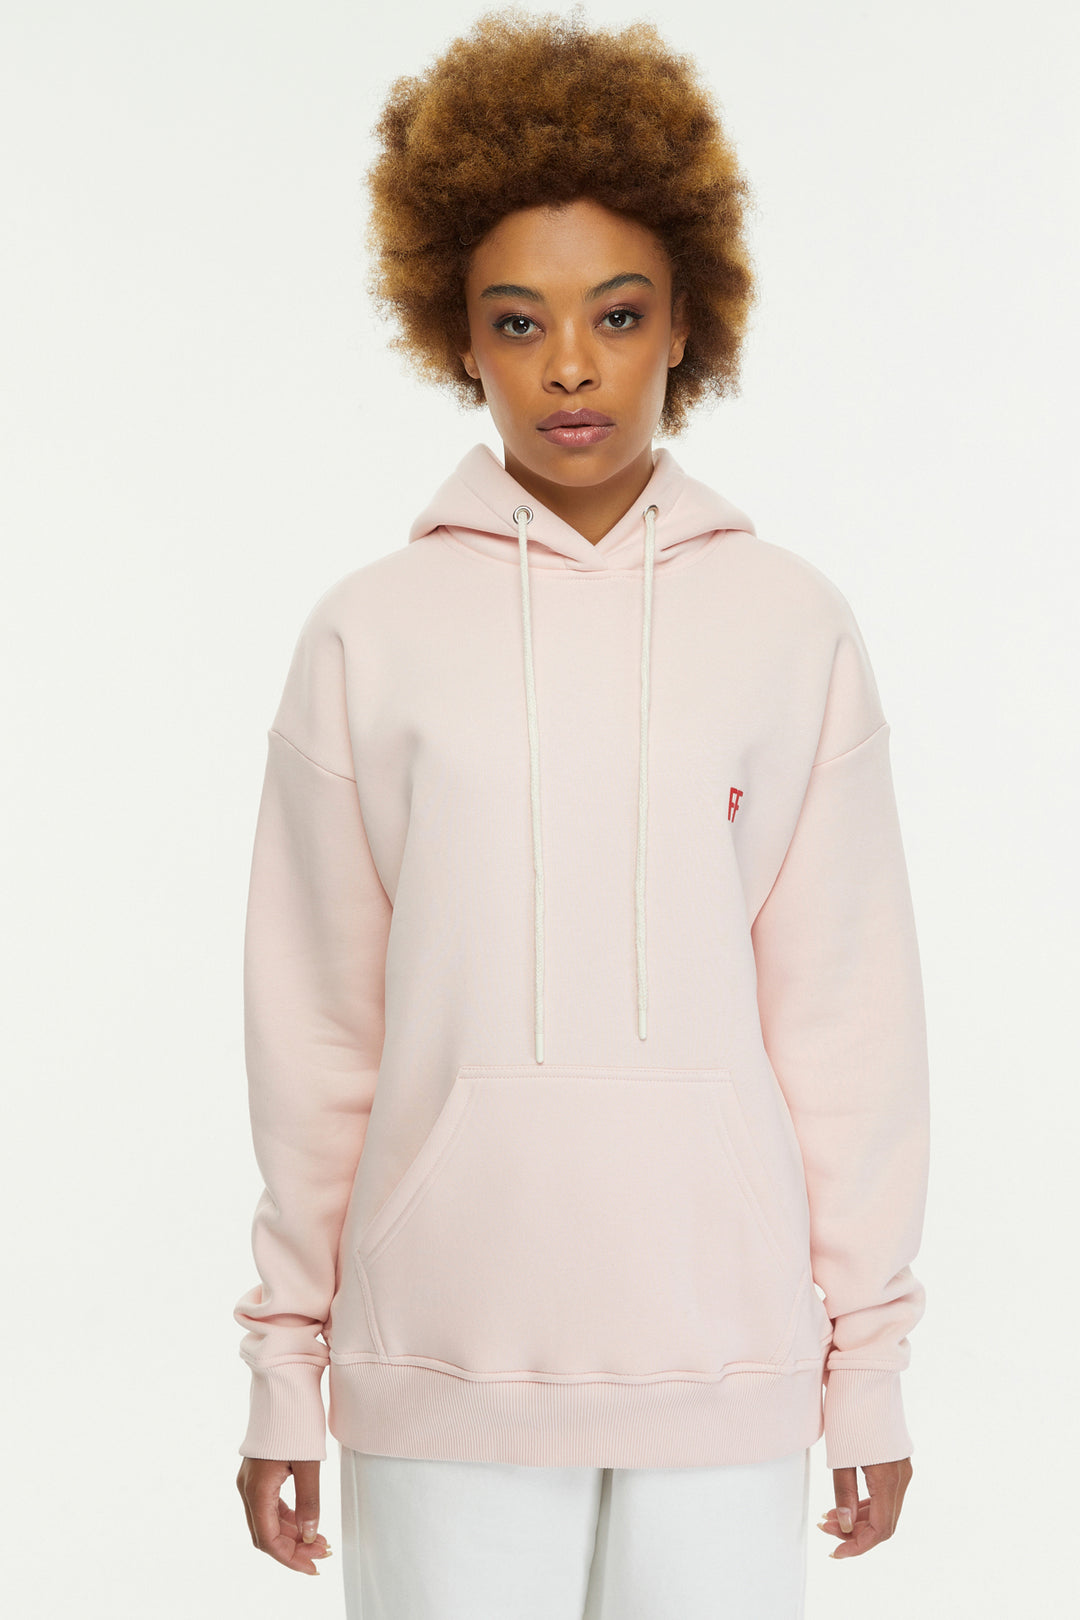 Forget / Oversized Pullover Hoodie